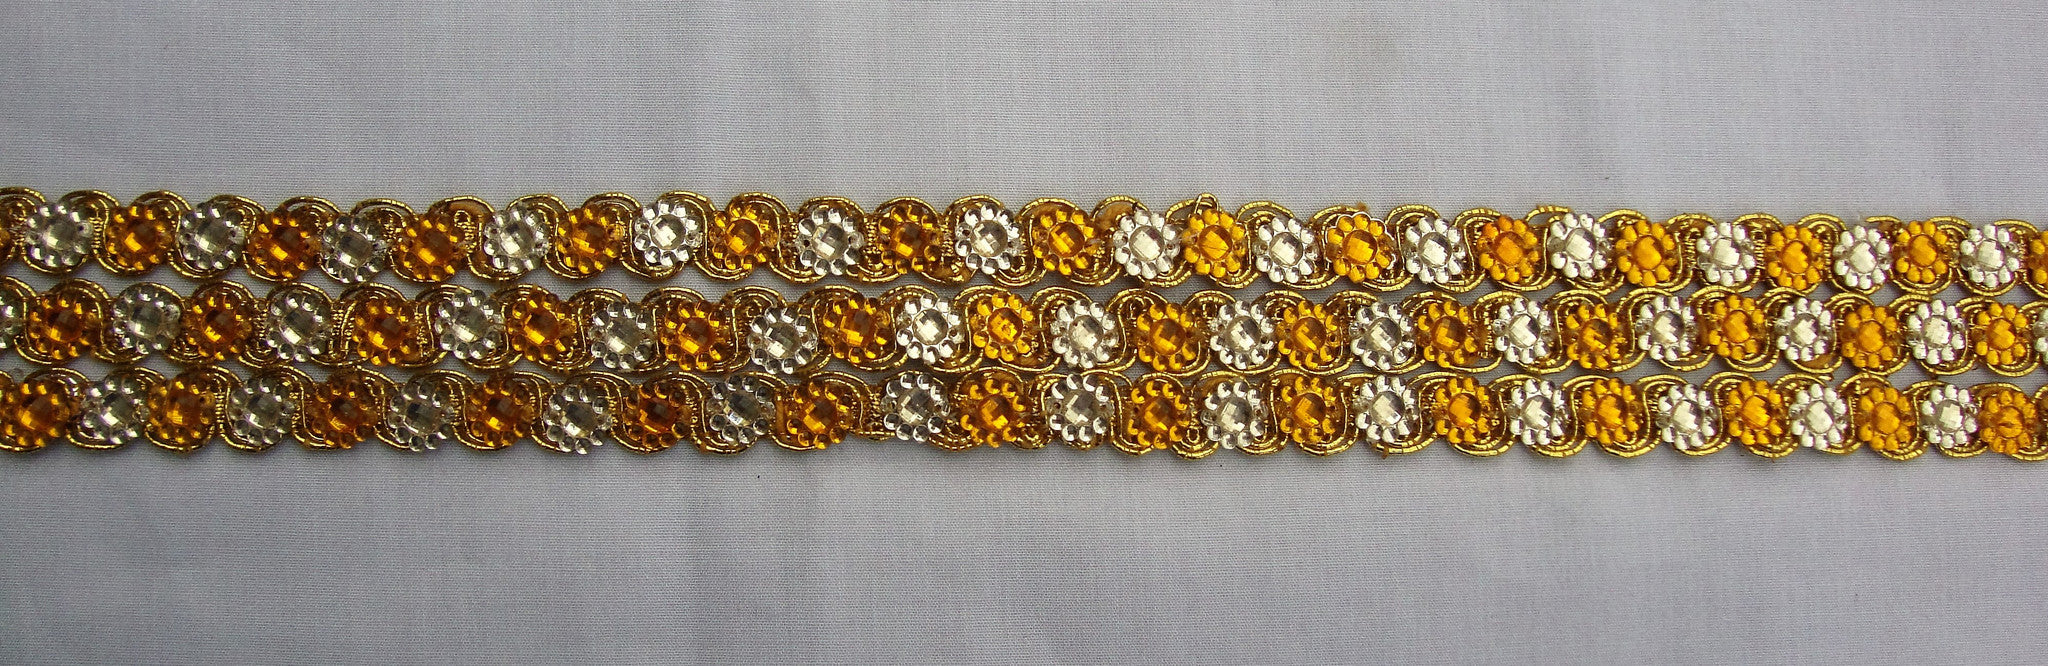 Yellow Gold Beaded Trimming (Sold as a 3 yard piece)